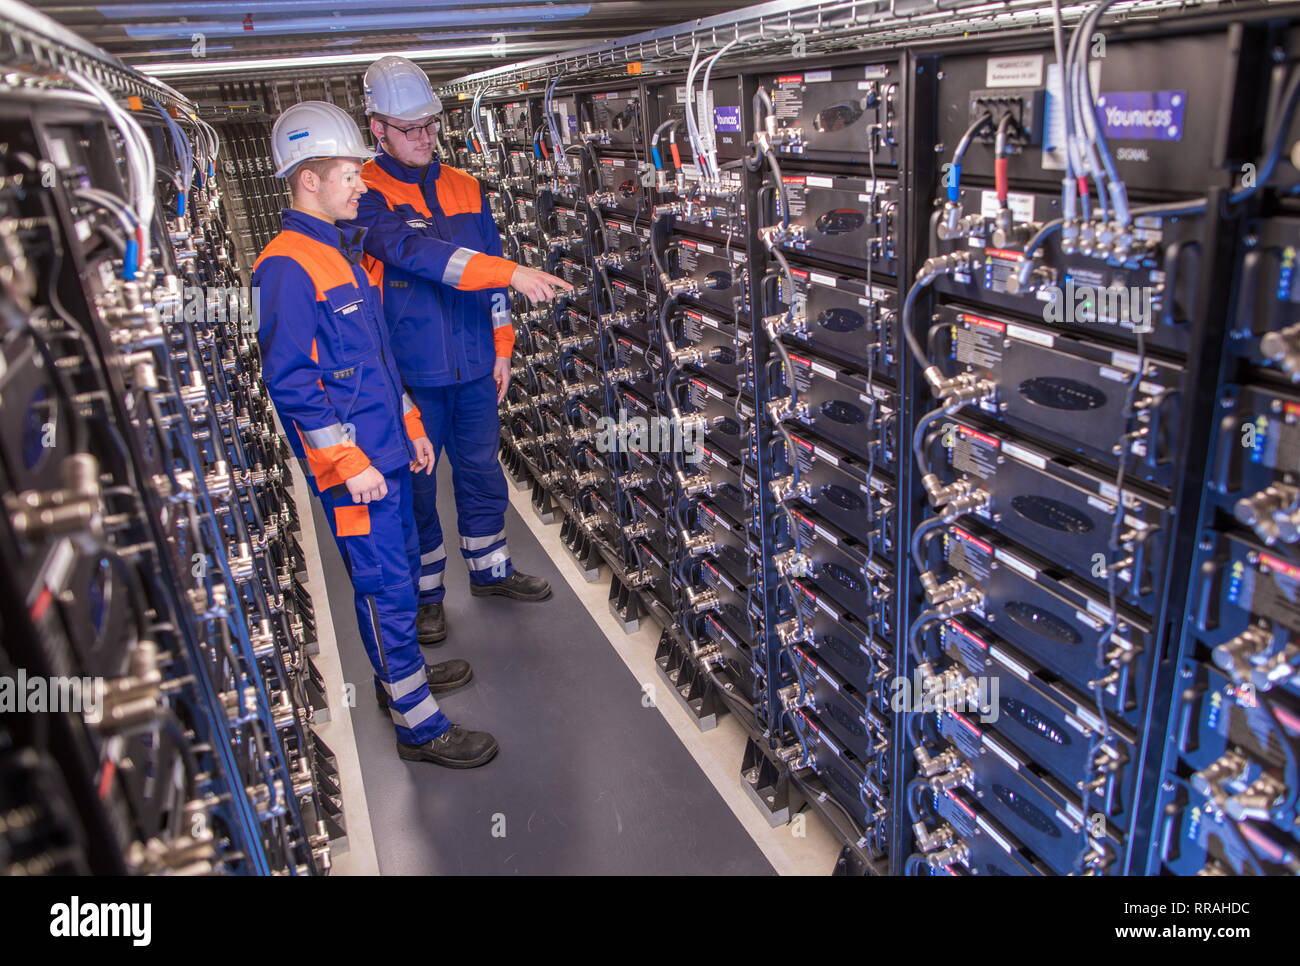 Schwerin, Germany. 25th Feb, 2019. The trainees Florian Maty (front) and Tom Hoffmann are standing in the battery storage of the energy supplier WEMAG. The skilled workers initiative 'Take off in MV' is launching a new campaign to improve the skilled workers situation in Mecklenburg-Western Pomerania. Credit: Jens Büttner/dpa-Zentralbild/ZB/dpa/Alamy Live News Stock Photo